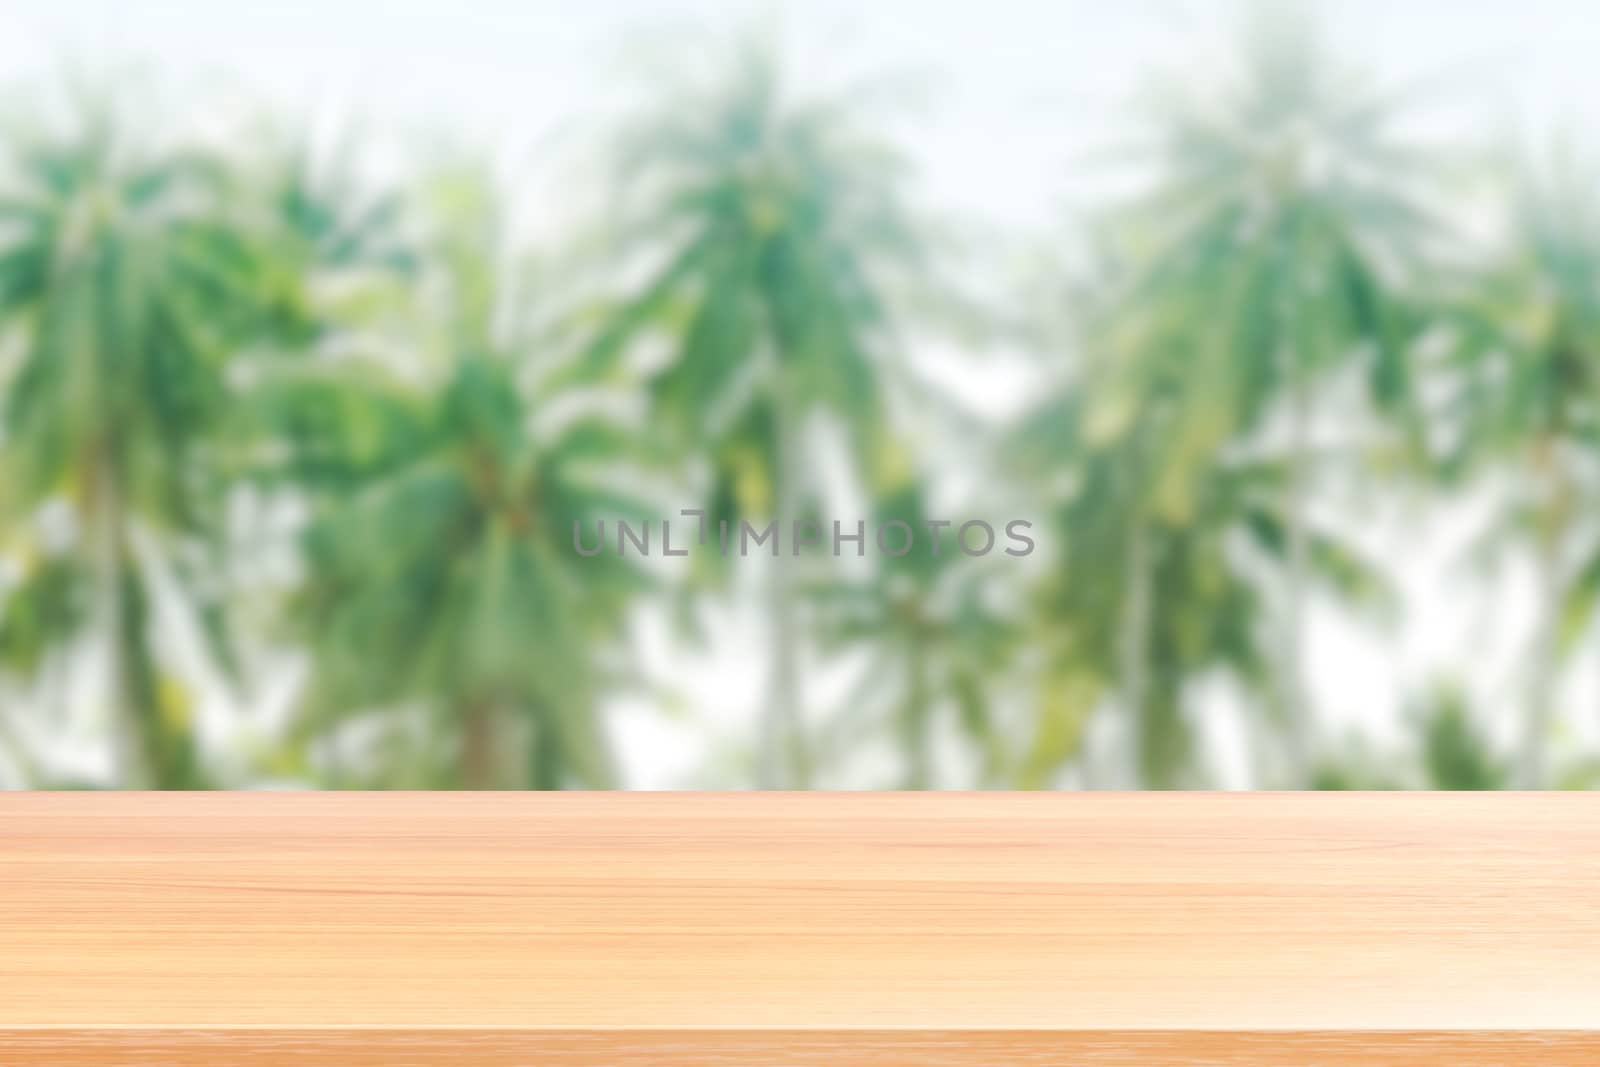 wood plank on coconut tree rows background blurred, empty wood table floors on coconut tree picture blur, wood table board empty front background coconut plantation nature for mock up display products by cgdeaw